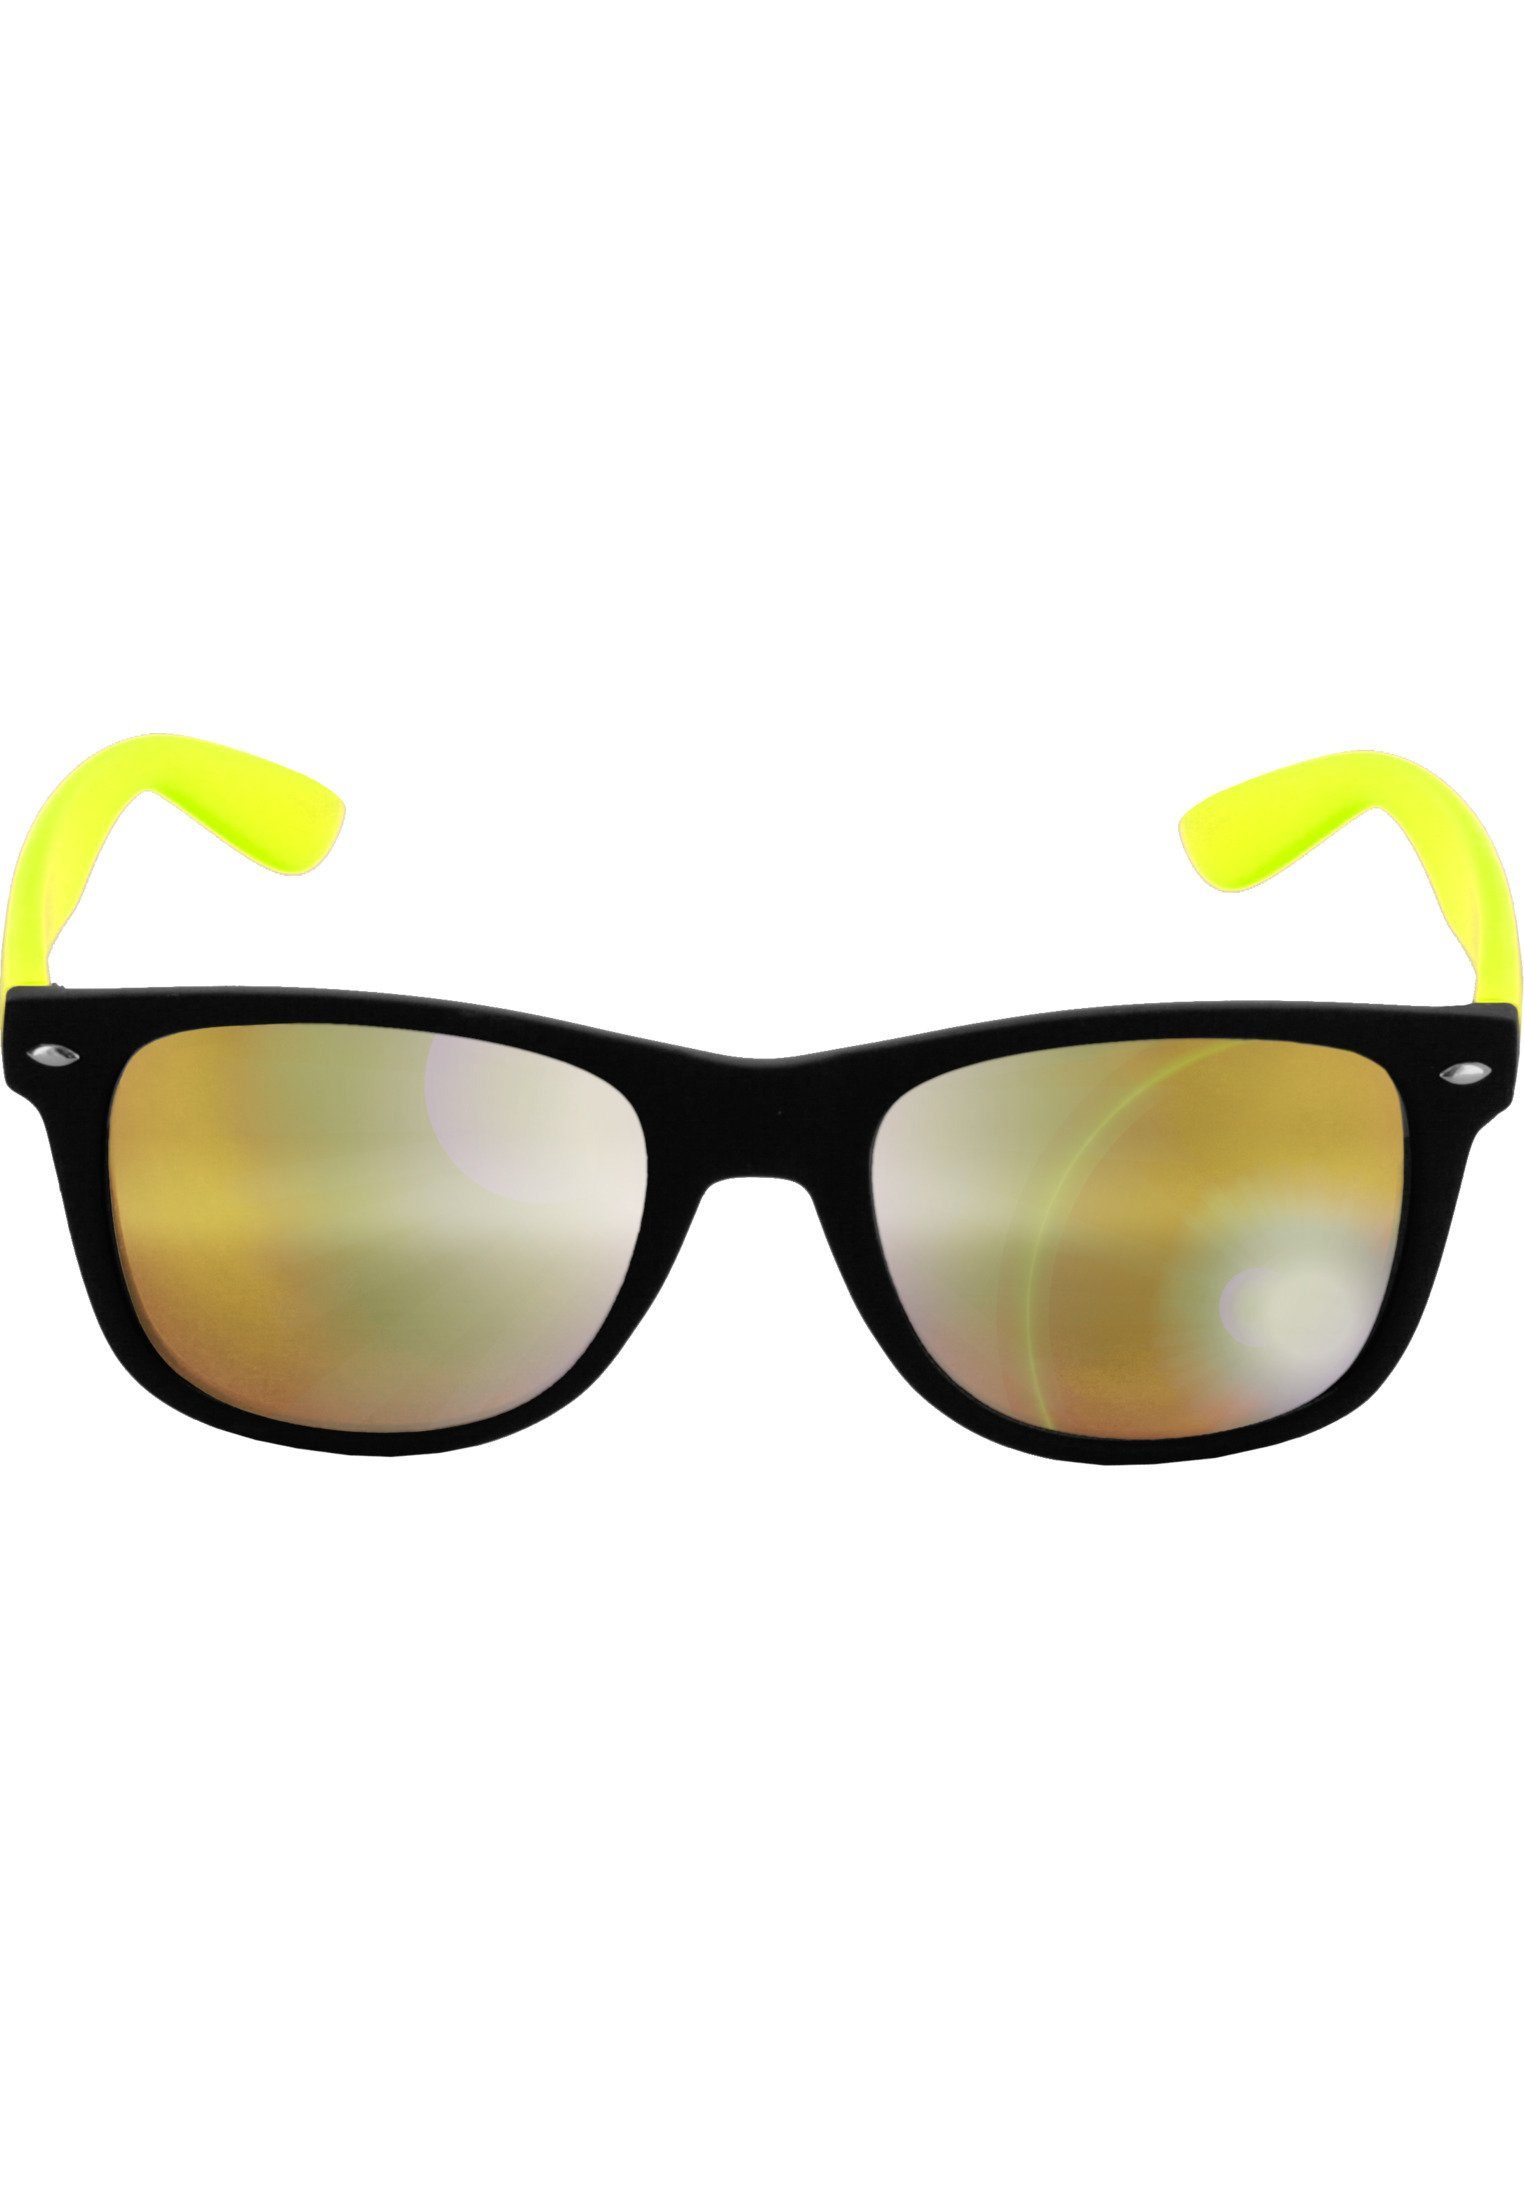 Sunglasses Likoma Accessoires Sonnenbrille blk/ylw/ylw MSTRDS Mirror